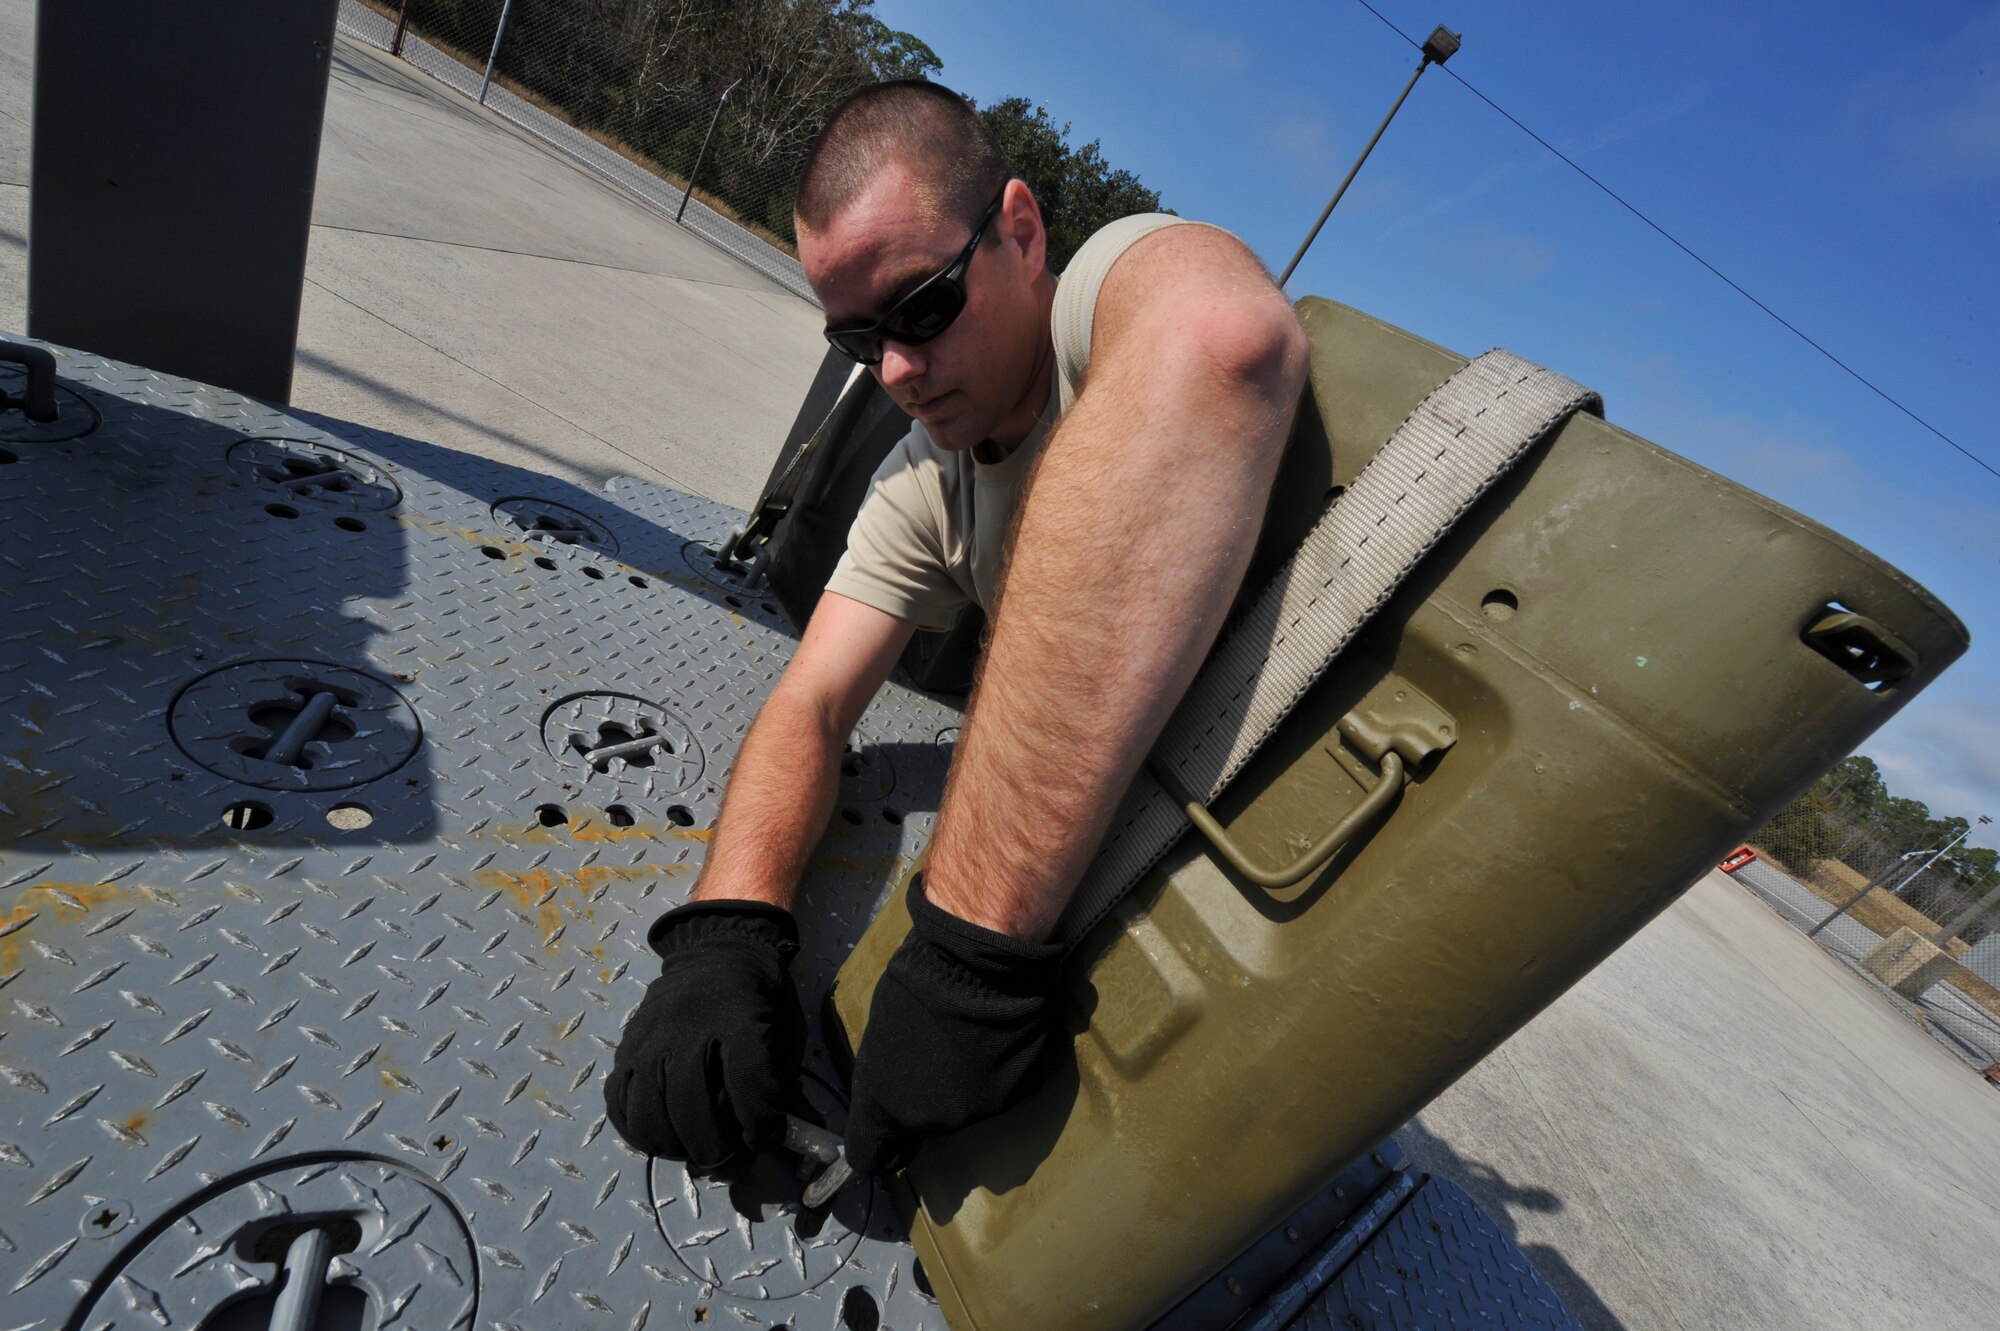 Senior Airman Patrick Beam, 1st Special Operations Equipment Maintenance Squadron munitions line delivery driver, secures a container of 40mm rounds to a munitions trailer on Hurlburt Field, Fla., Dec. 6, 2013. Line delivery drivers Properly secured containers to prevent damage during transport. (U.S. Air Force photo/Staff Sgt. John Bainter)